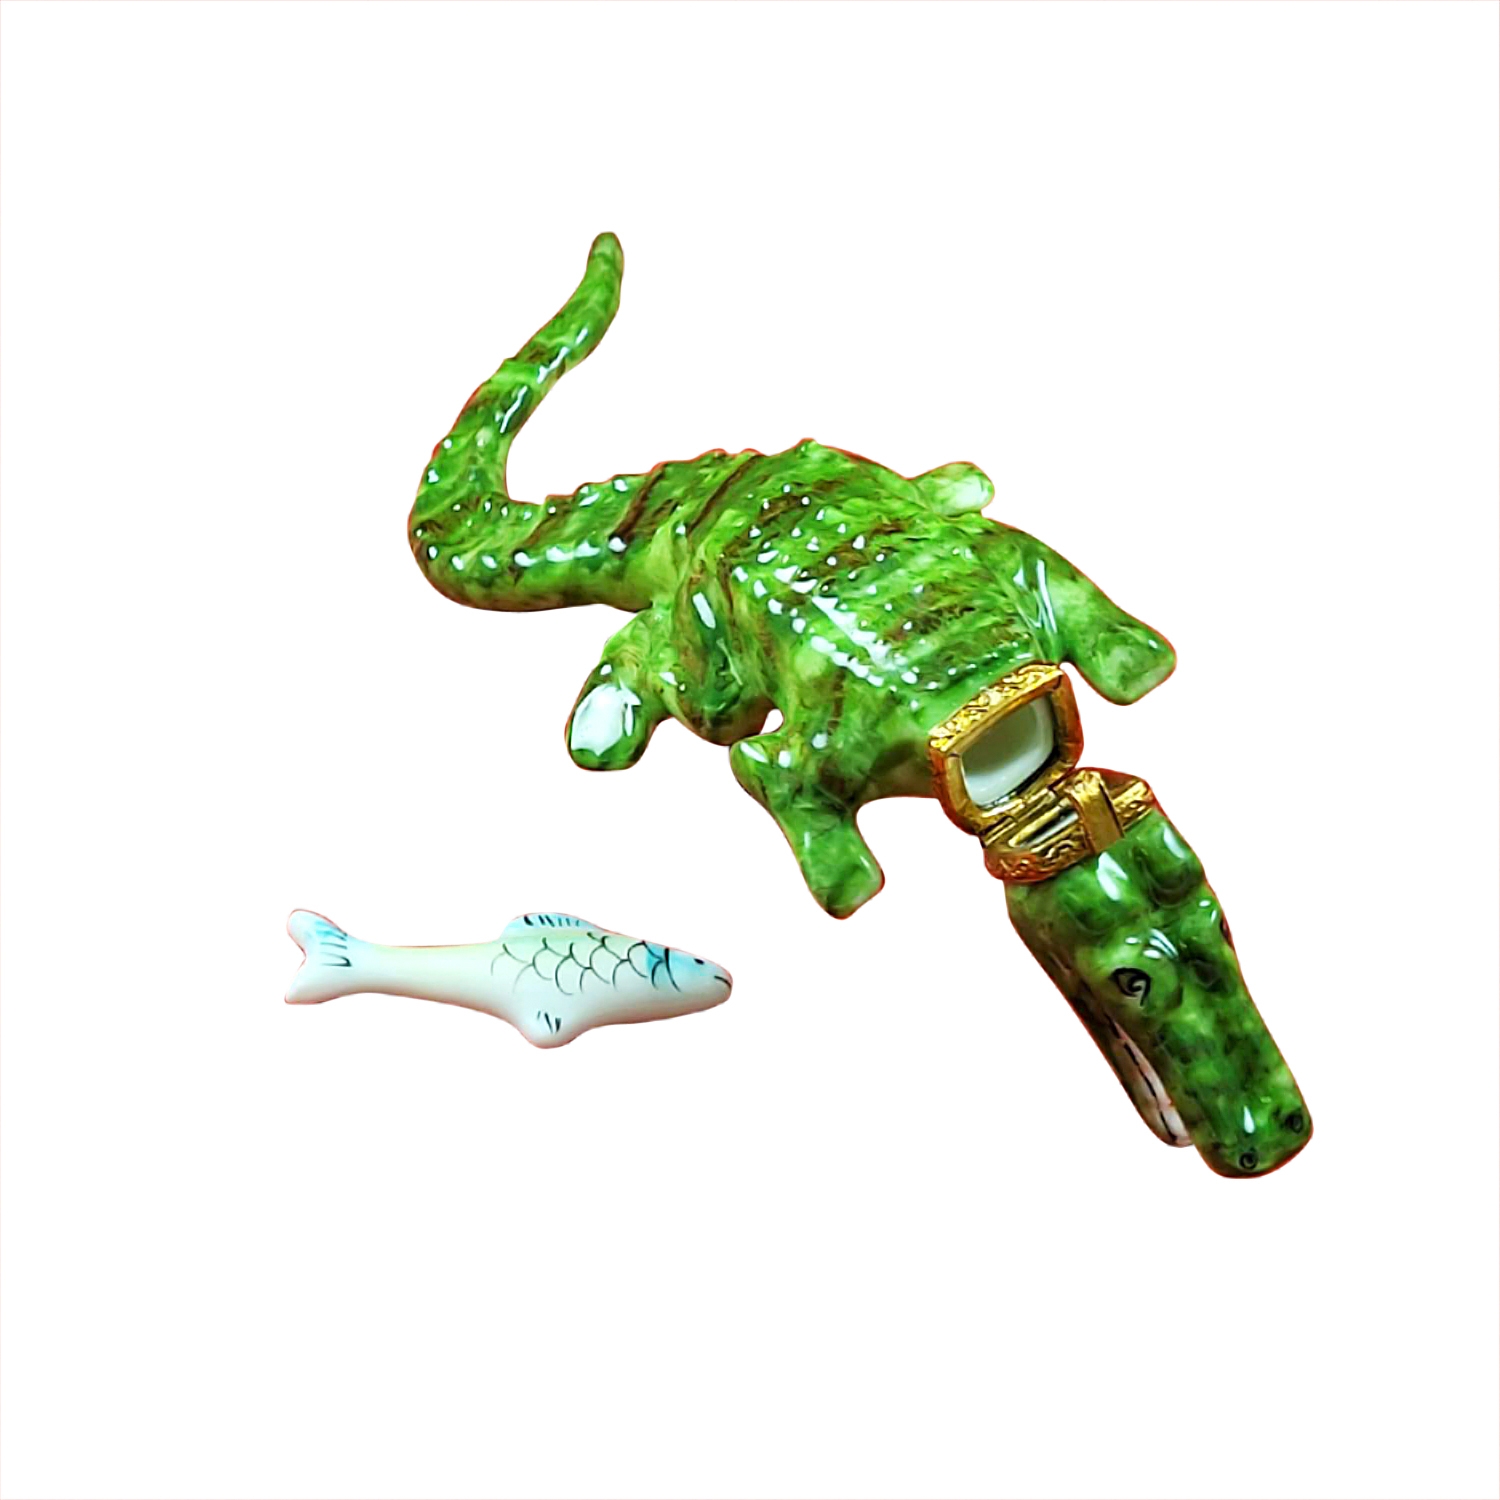 GREEN CROCODILE WITH A REMOVABLE FISH